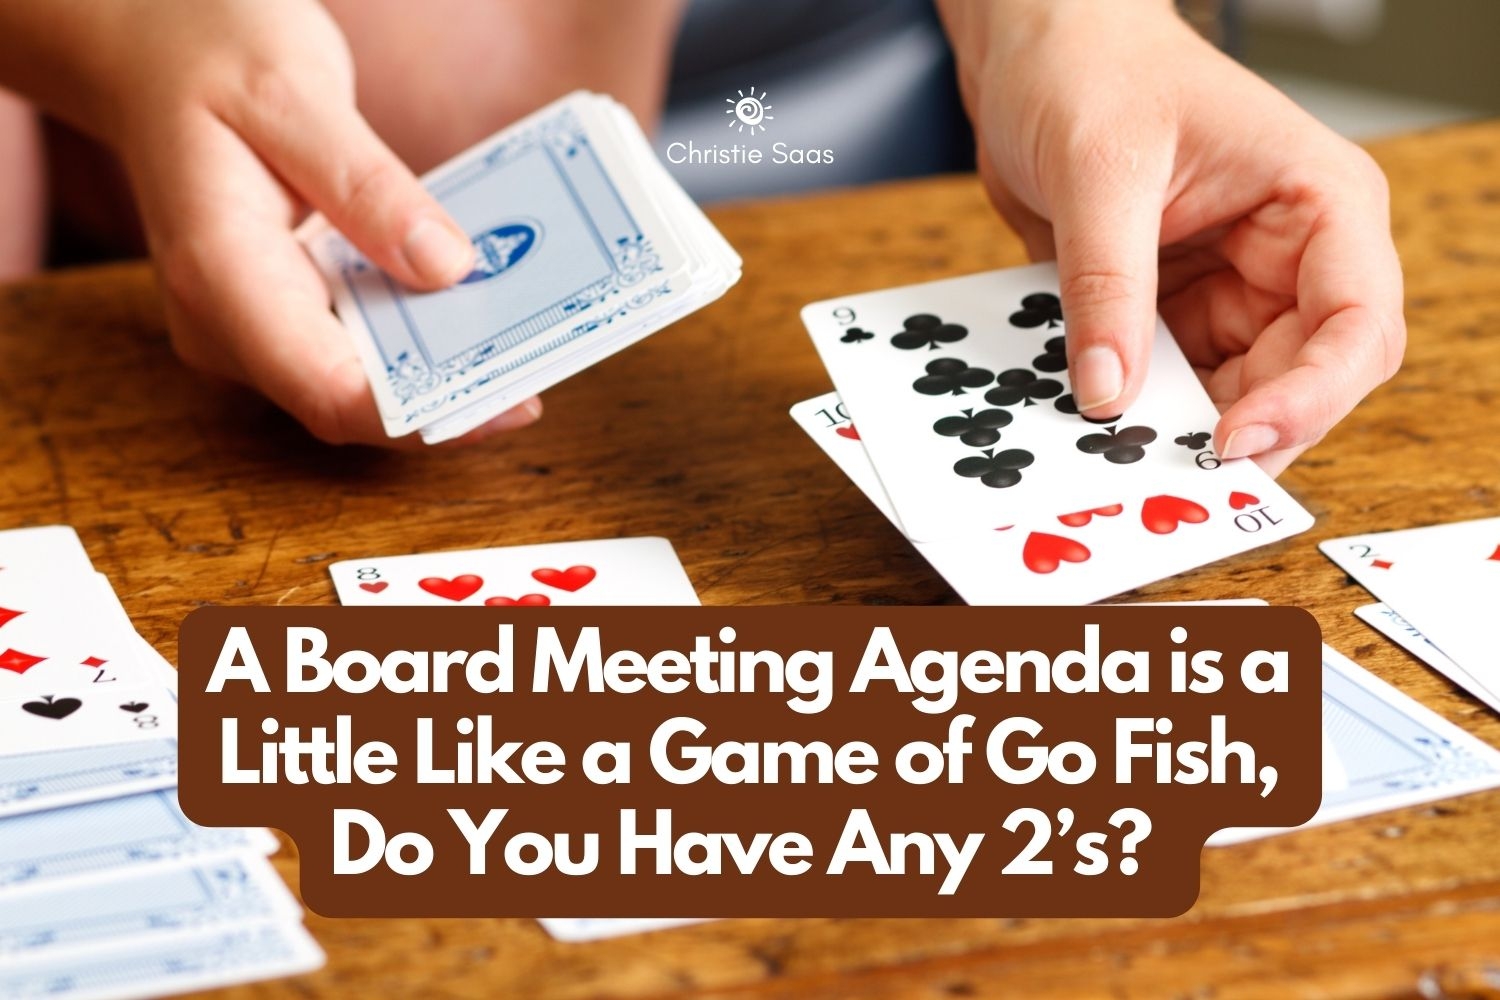 A Board Meeting Agenda is a Little Like a Game of Go Fish, Do You Have Any 2’s?